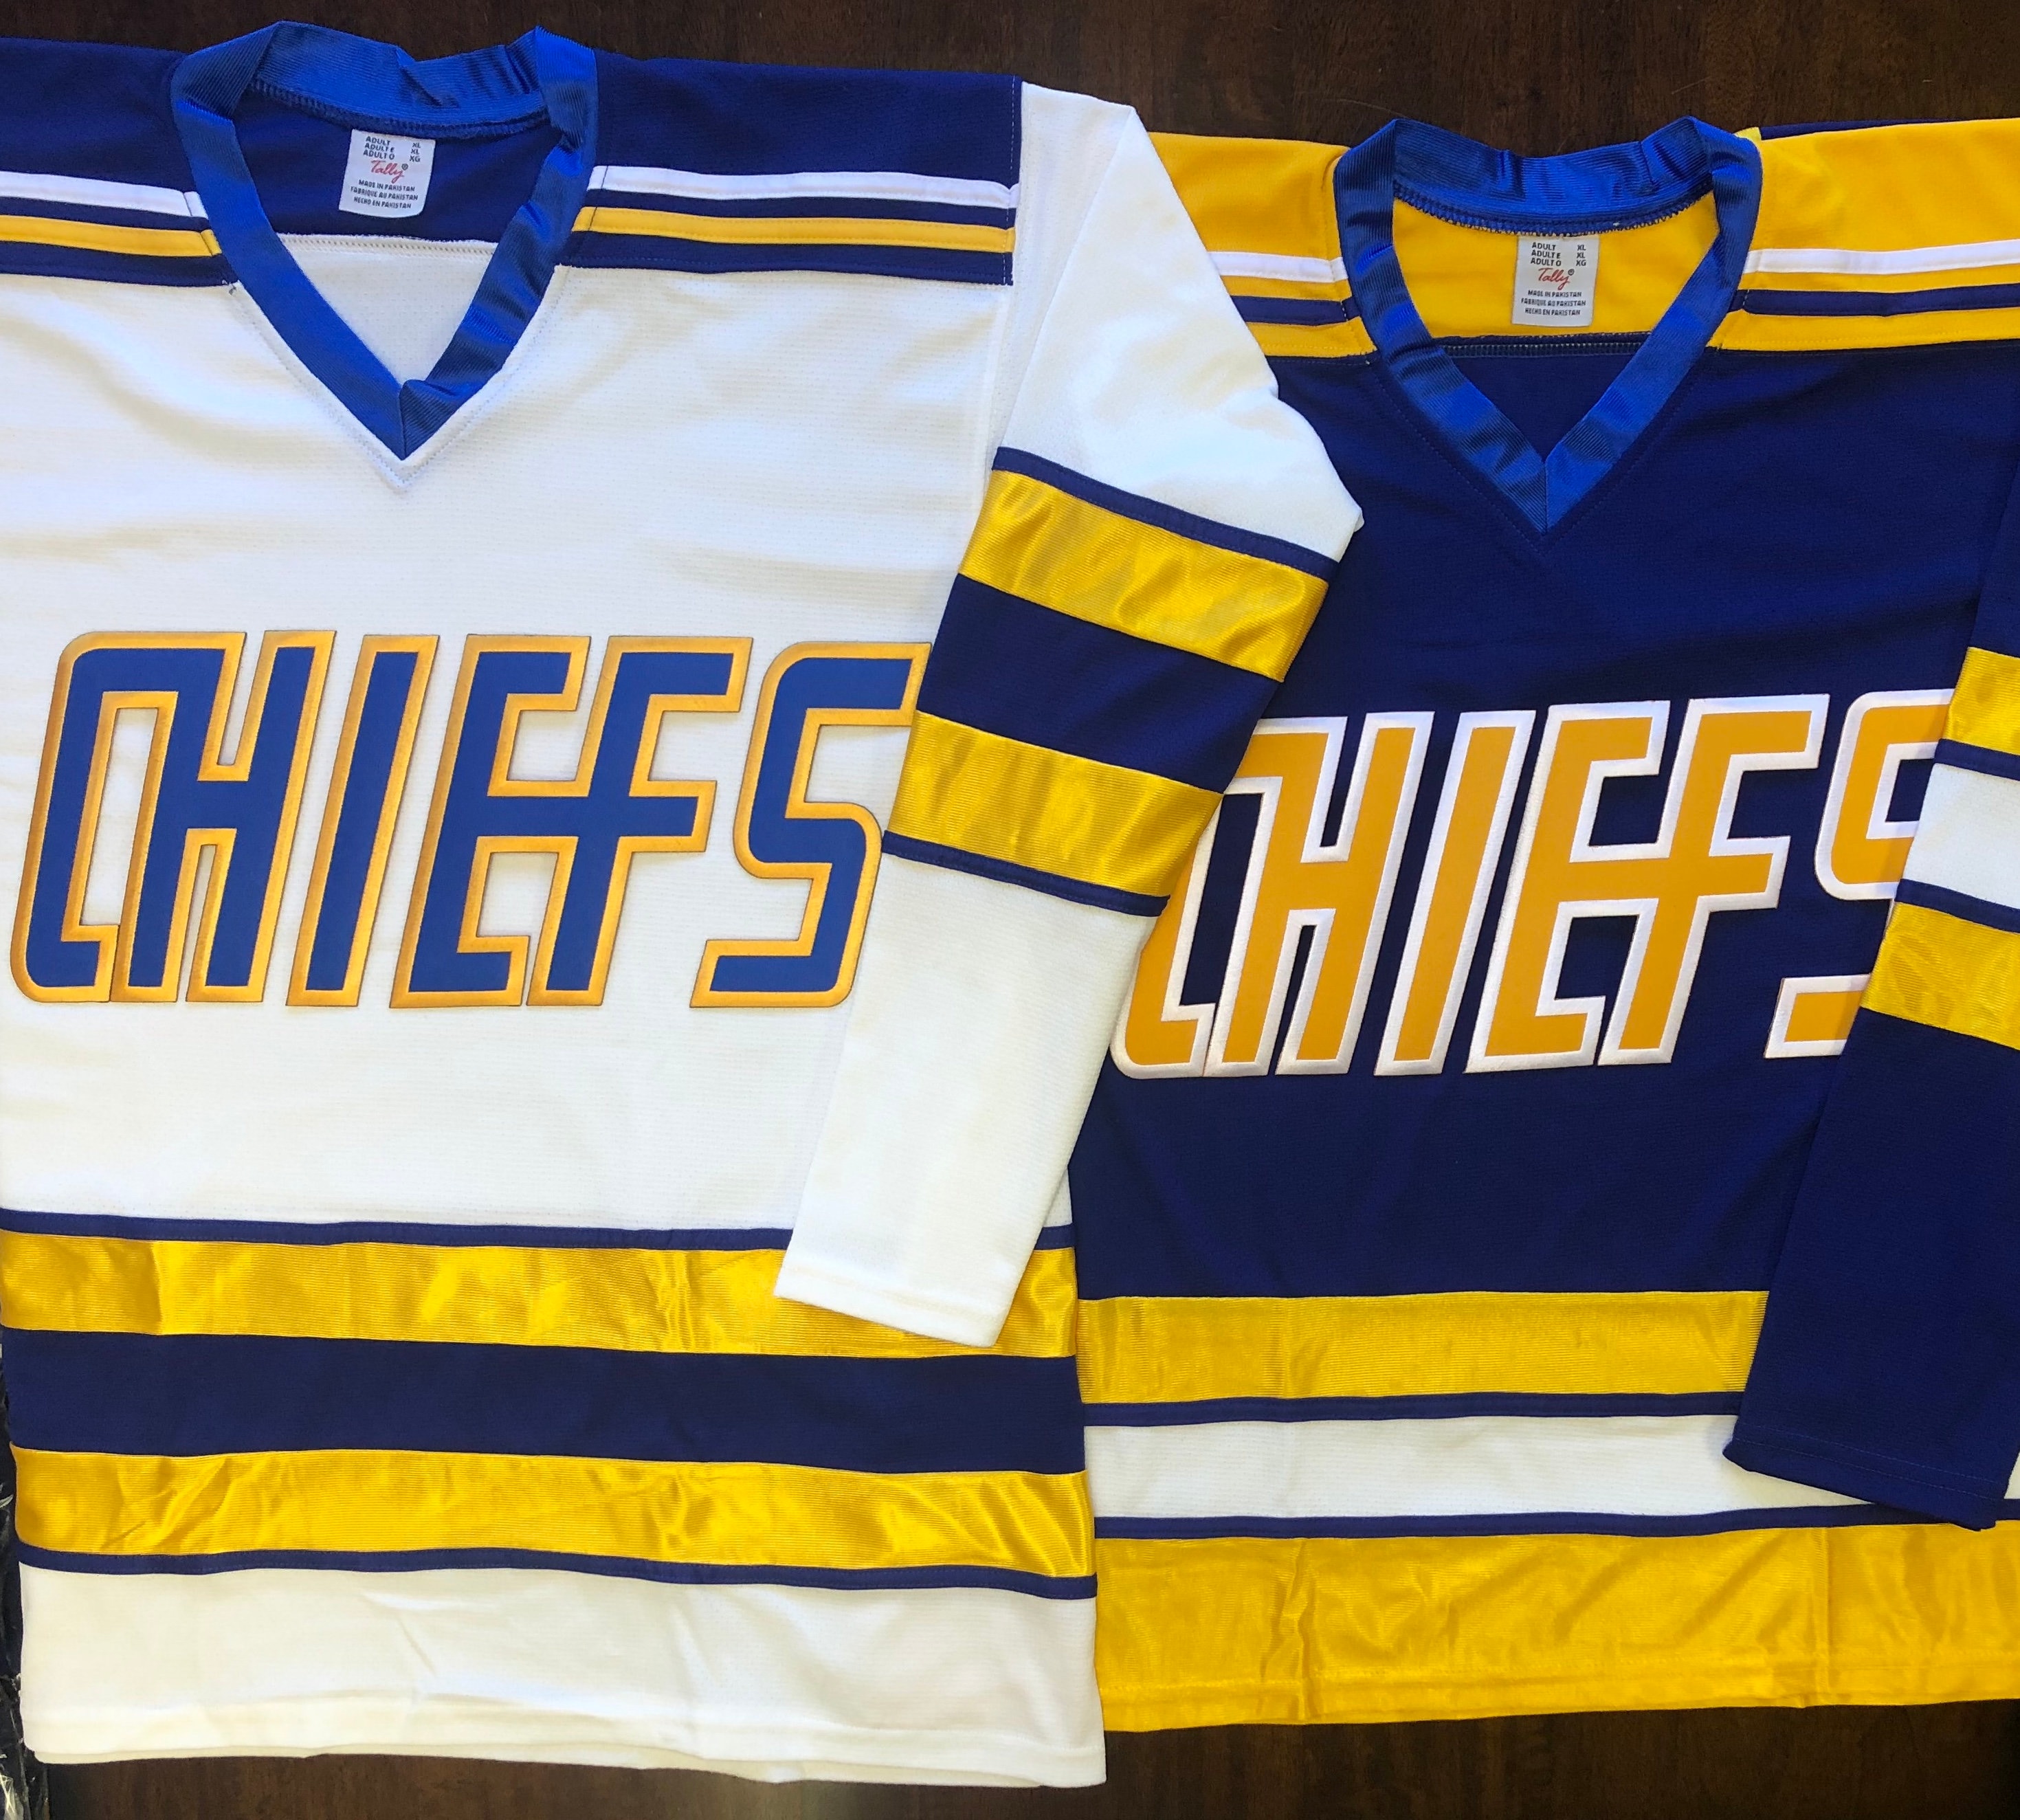 Custom Hockey Jerseys with a Team Sweden Embroidered Twill Crest